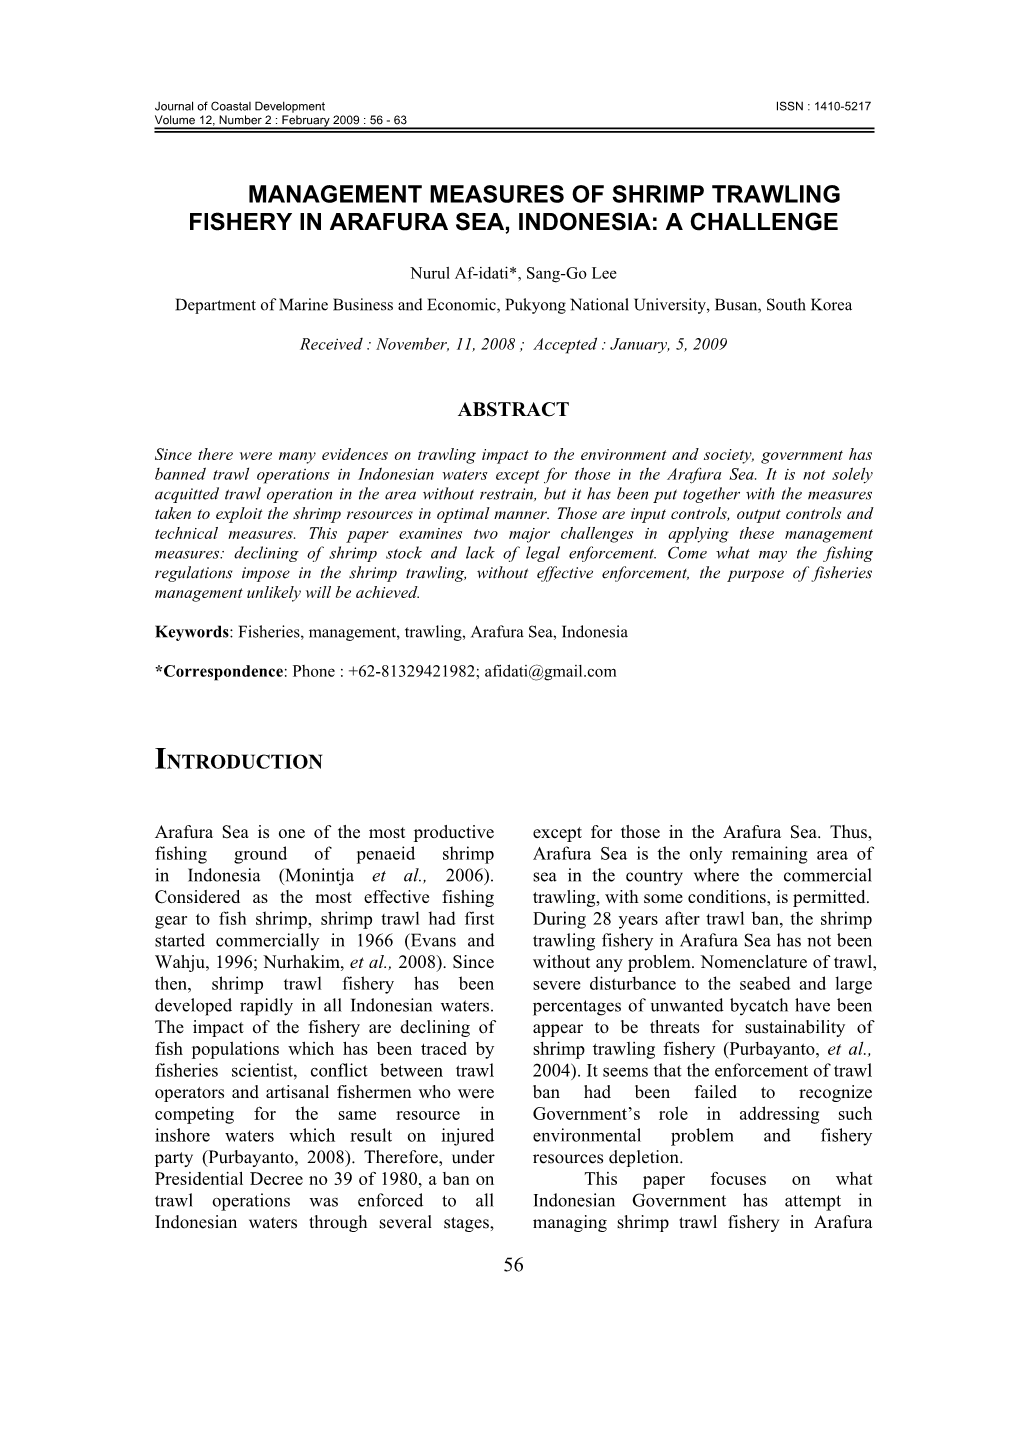 Management Measures of Shrimp Trawling Fishery in Arafura Sea, Indonesia: a Challenge